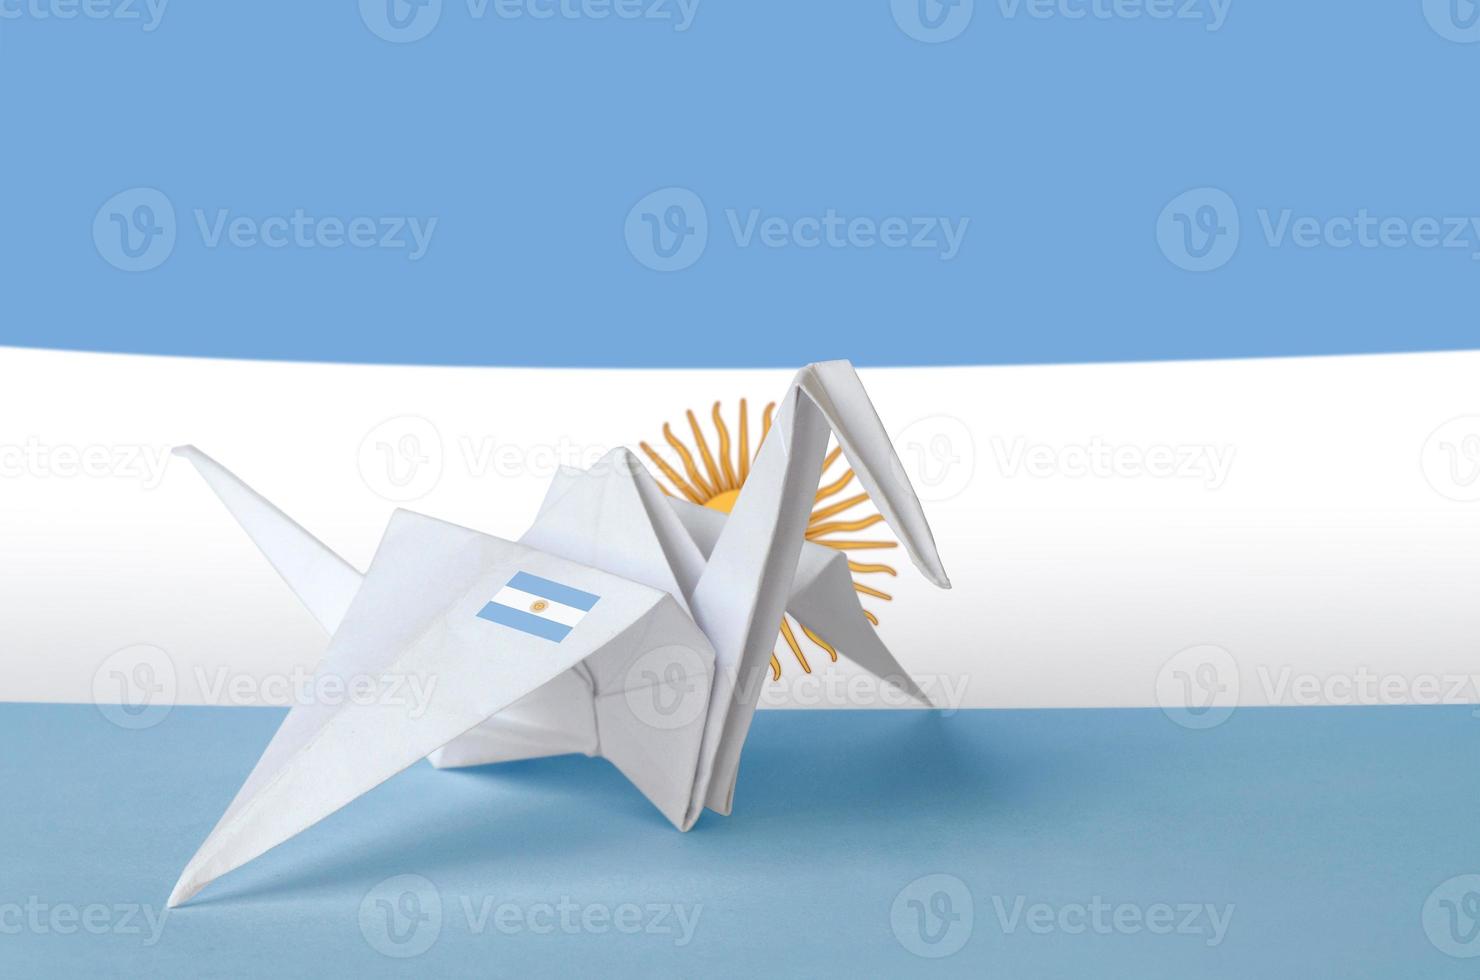 Argentina flag depicted on paper origami crane wing. Handmade arts concept photo